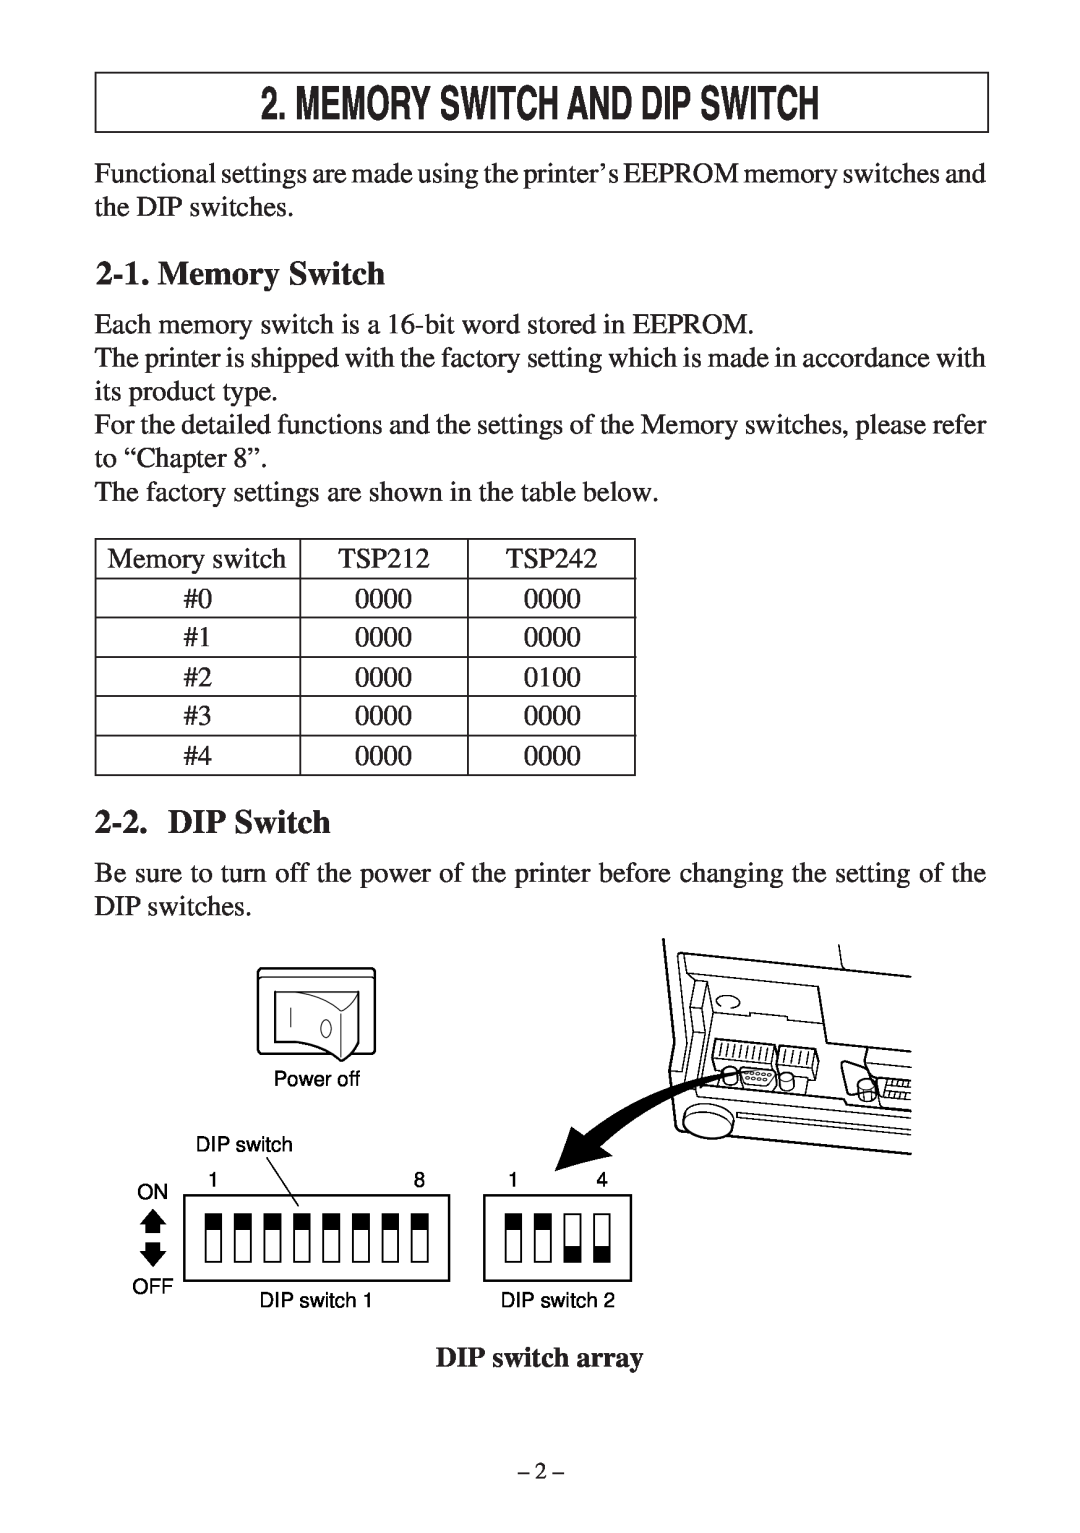 Star Micronics RS232 manual Memory Switch And Dip Switch, DIP Switch, DIP switch array 